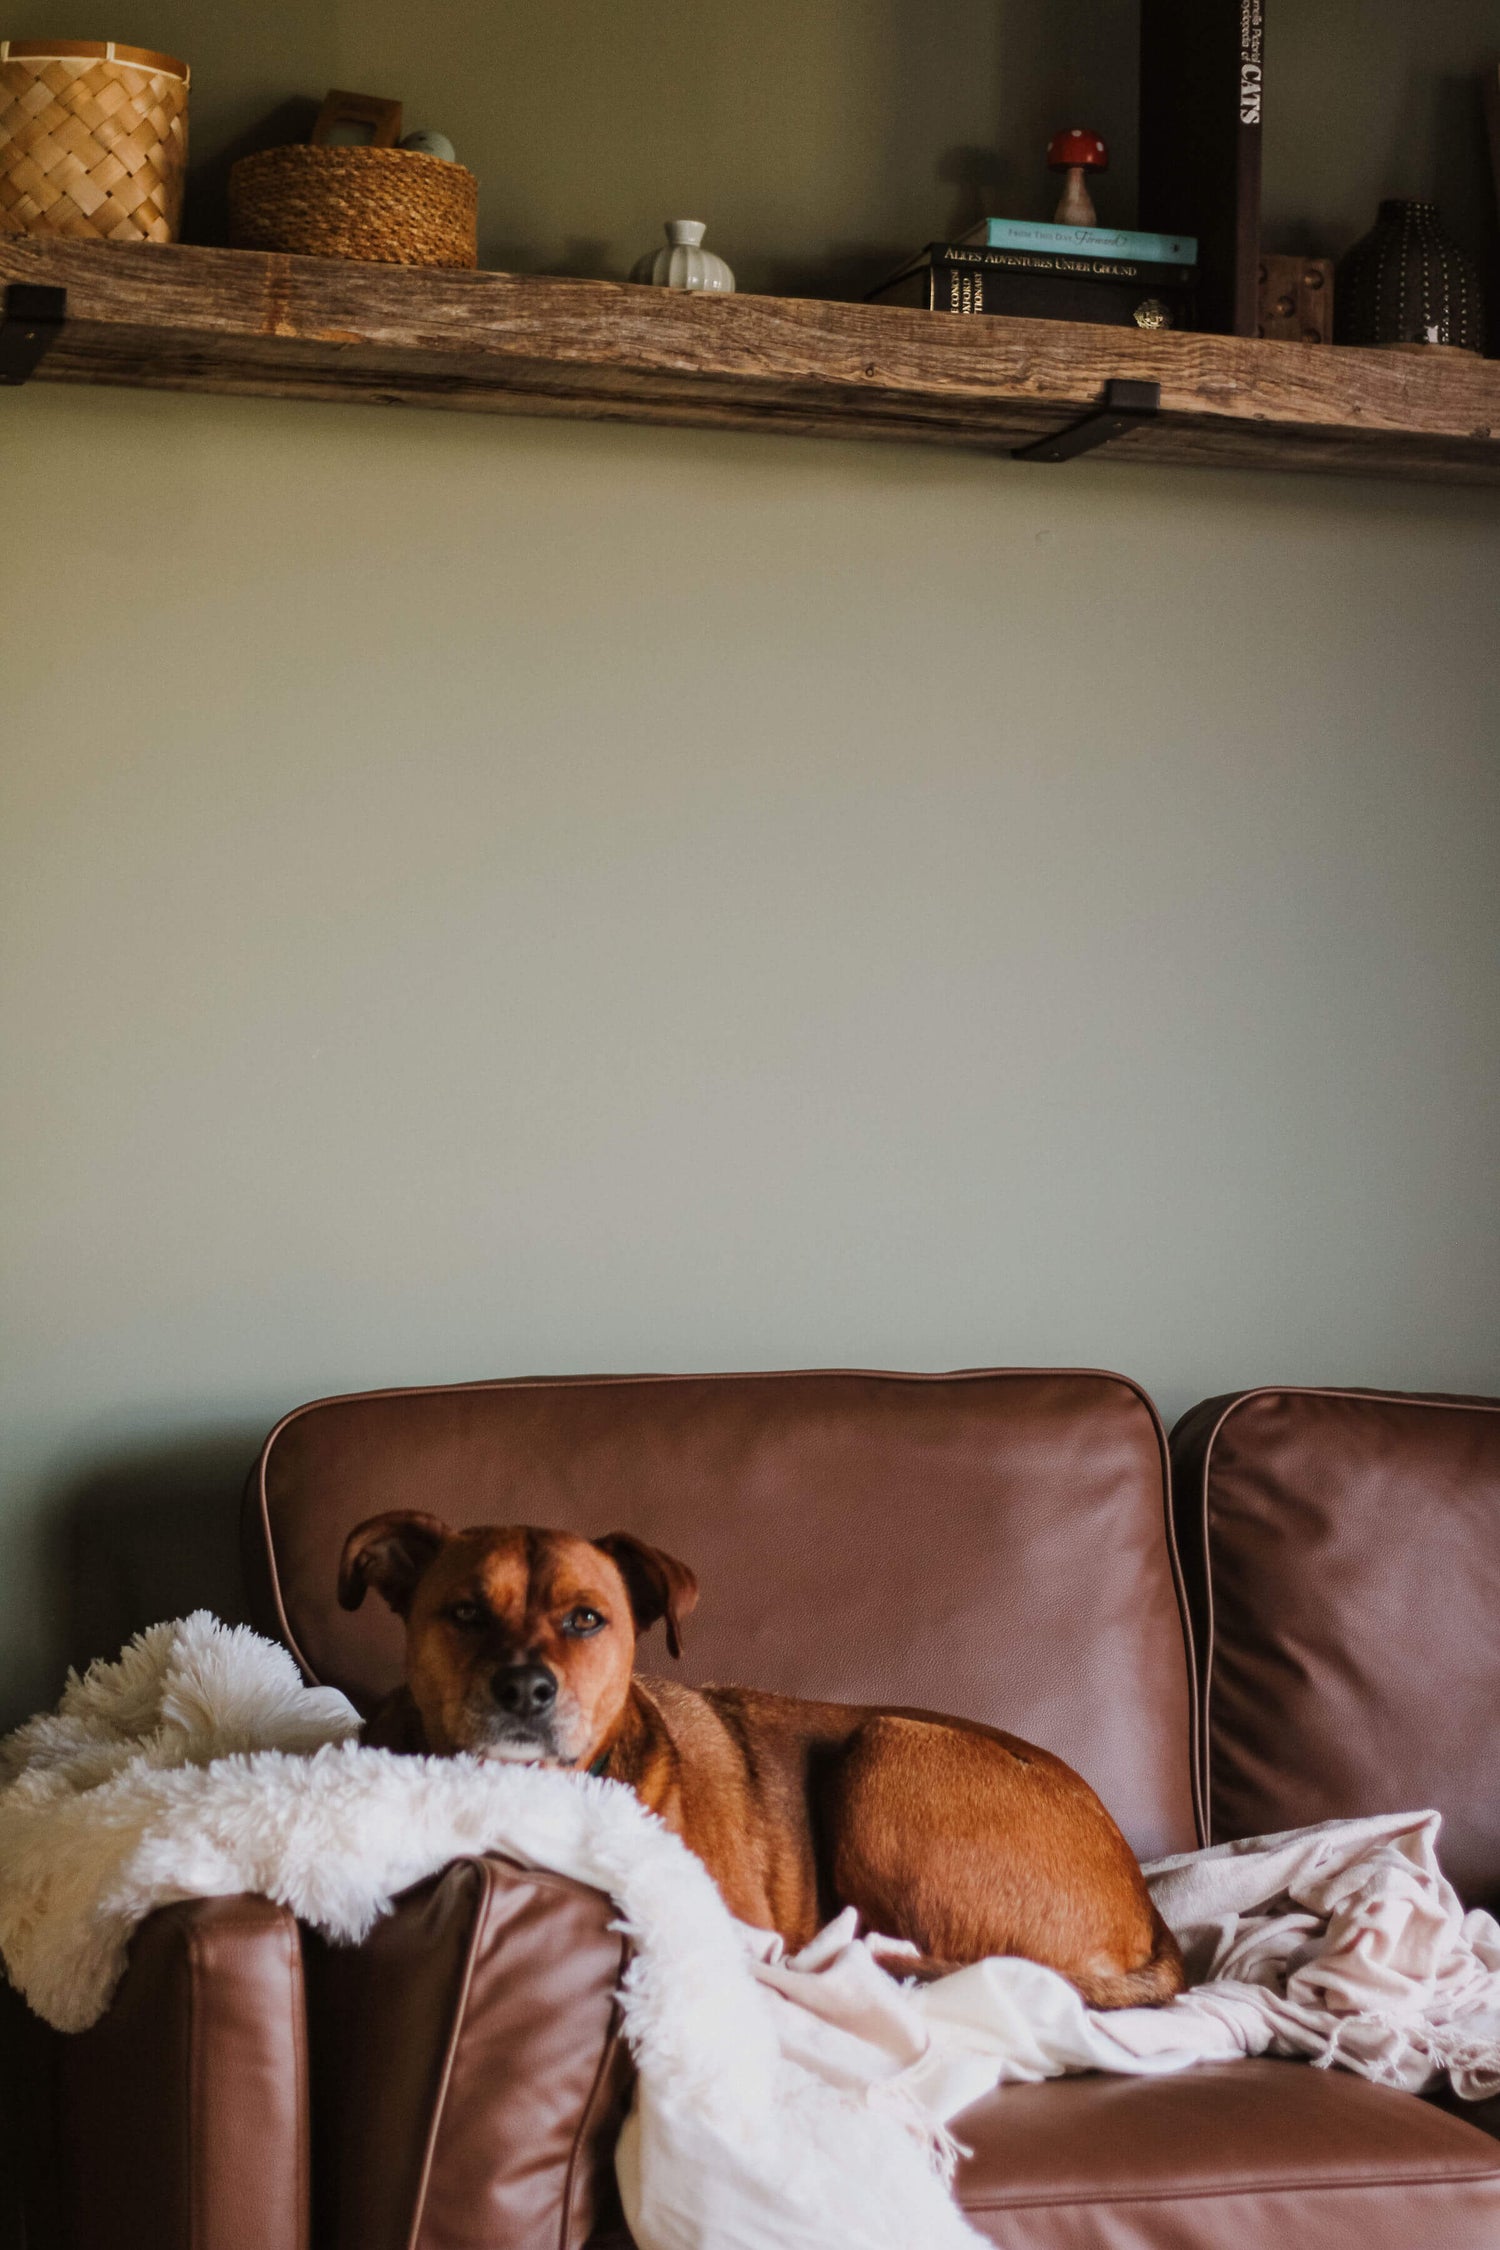 A dog lying on a brown leather sofa on some fluffy white blankets